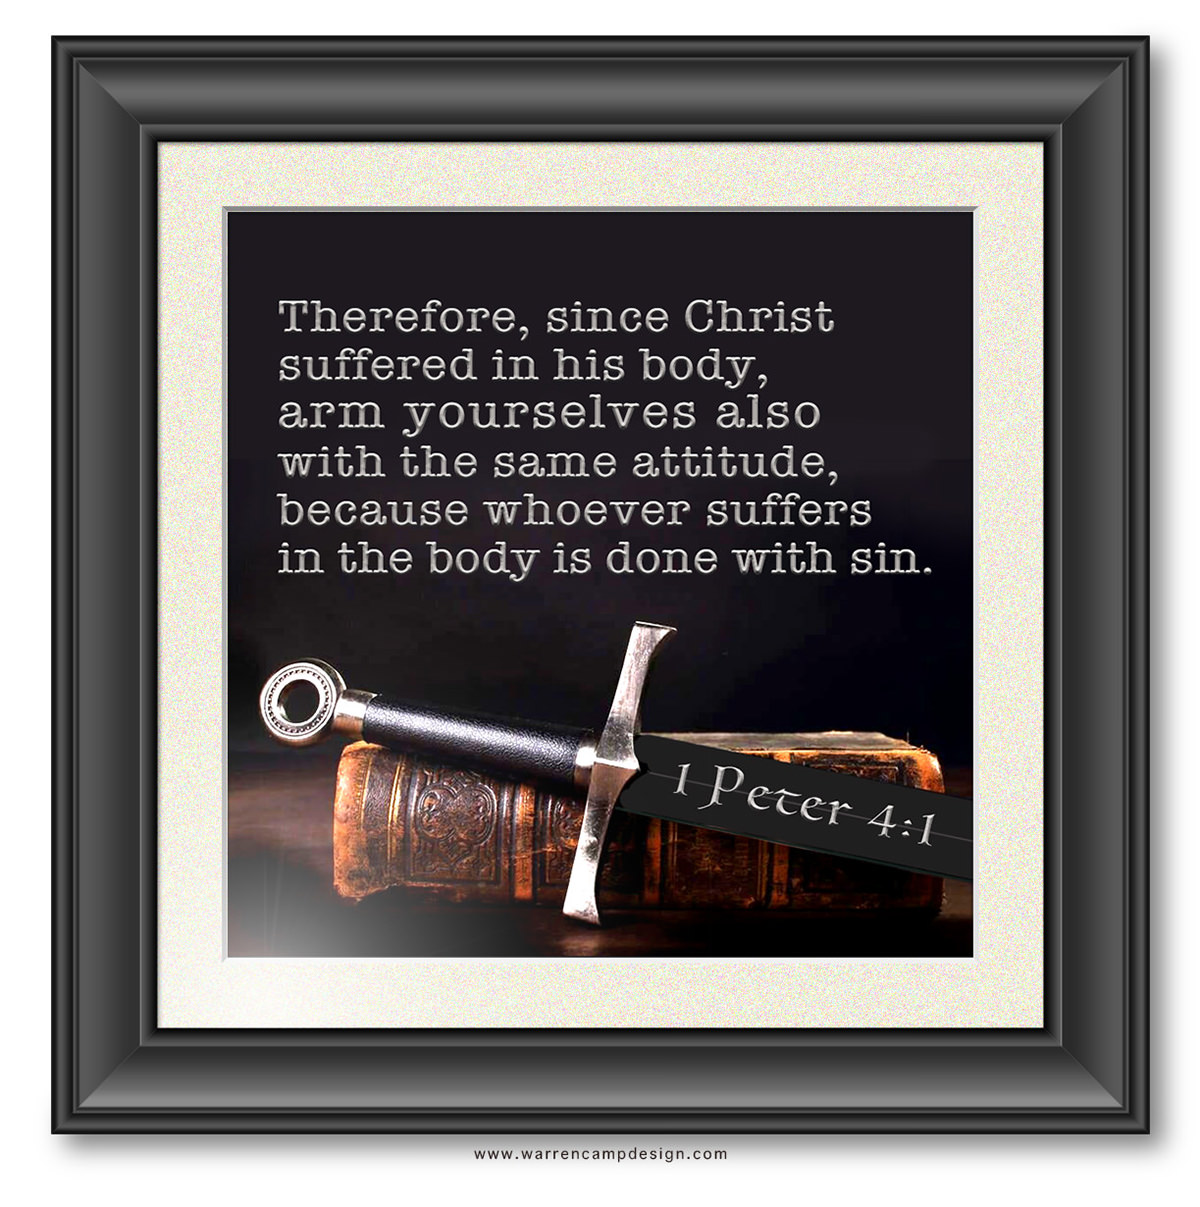 Scripture picture of 1st Peter 4:1, emphasizing the importance of arming yourself with the attitude of Jesus.